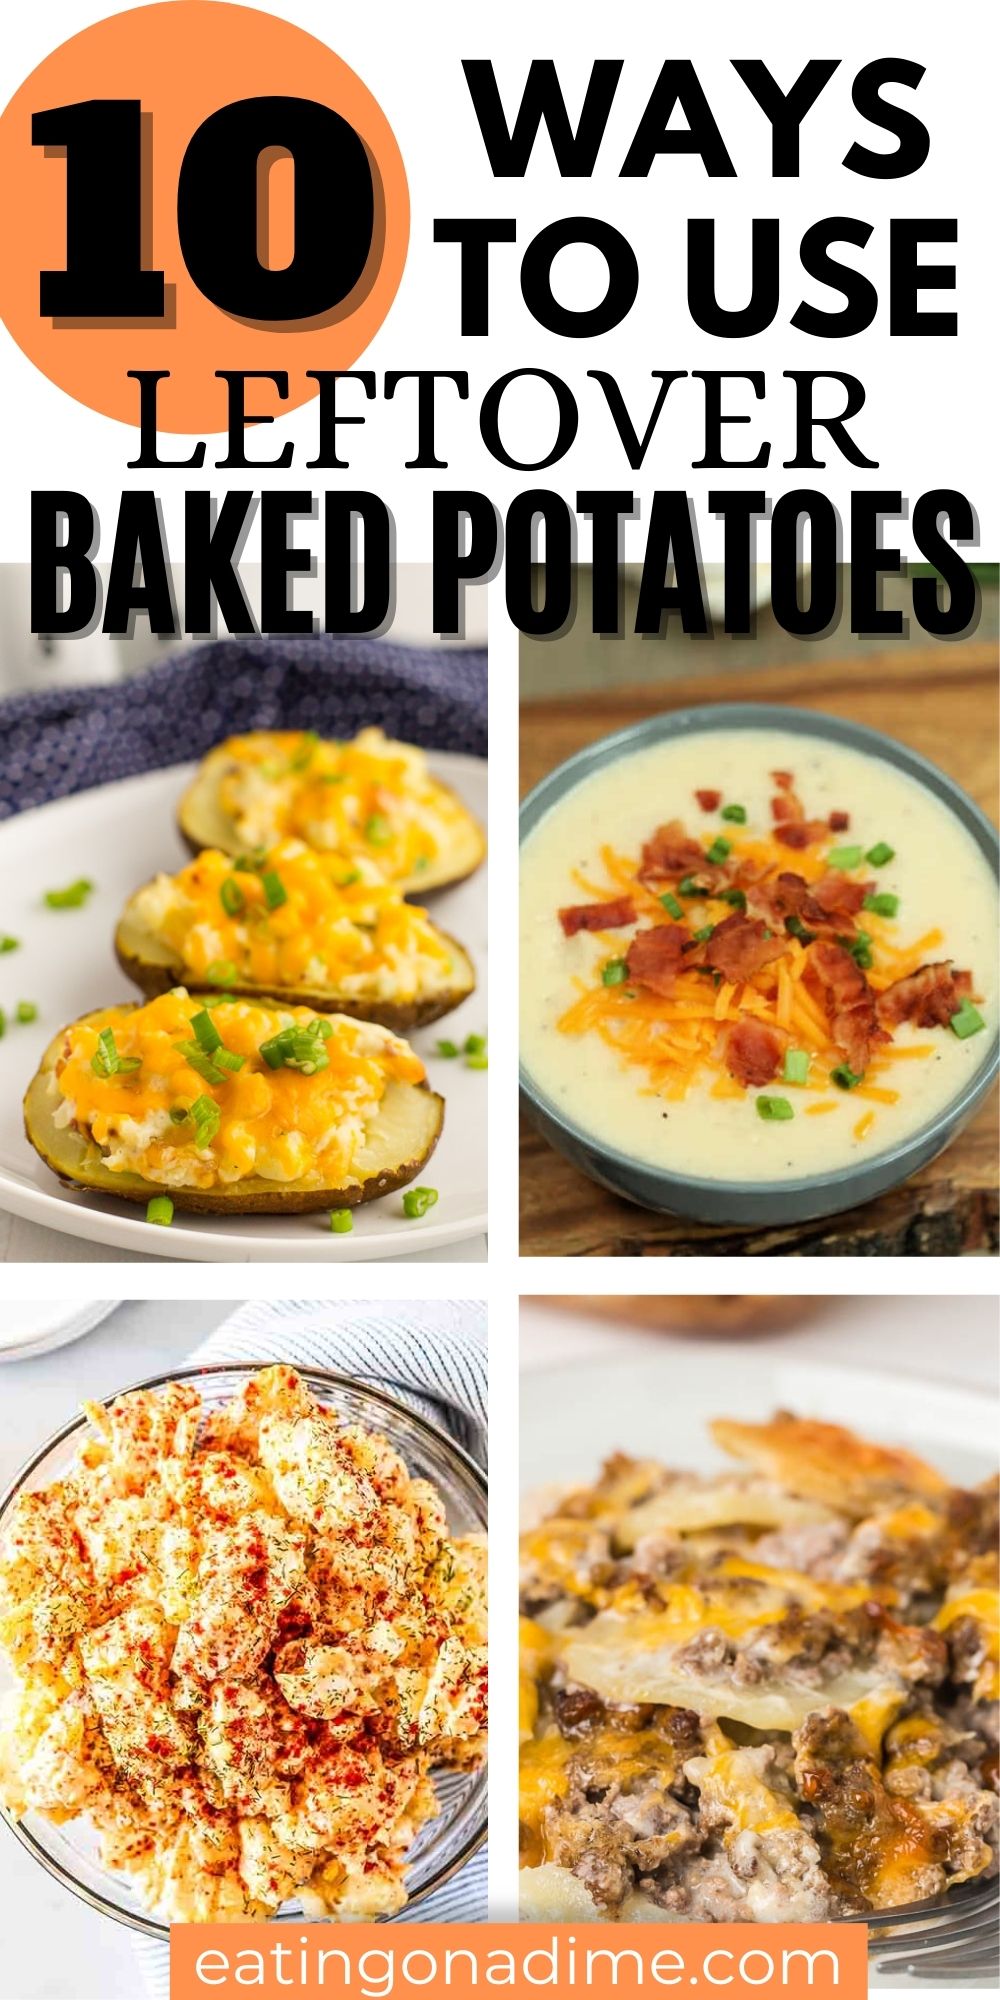 Try these delicious and easy ways to reuse leftover baked potatoes. Never waste another potato with these tasty ideas. Learn what to do with all your leftover baked potatoes with these 10 yummy ideas! #eatingonadime #potatorecipes #sidedishrecipes 